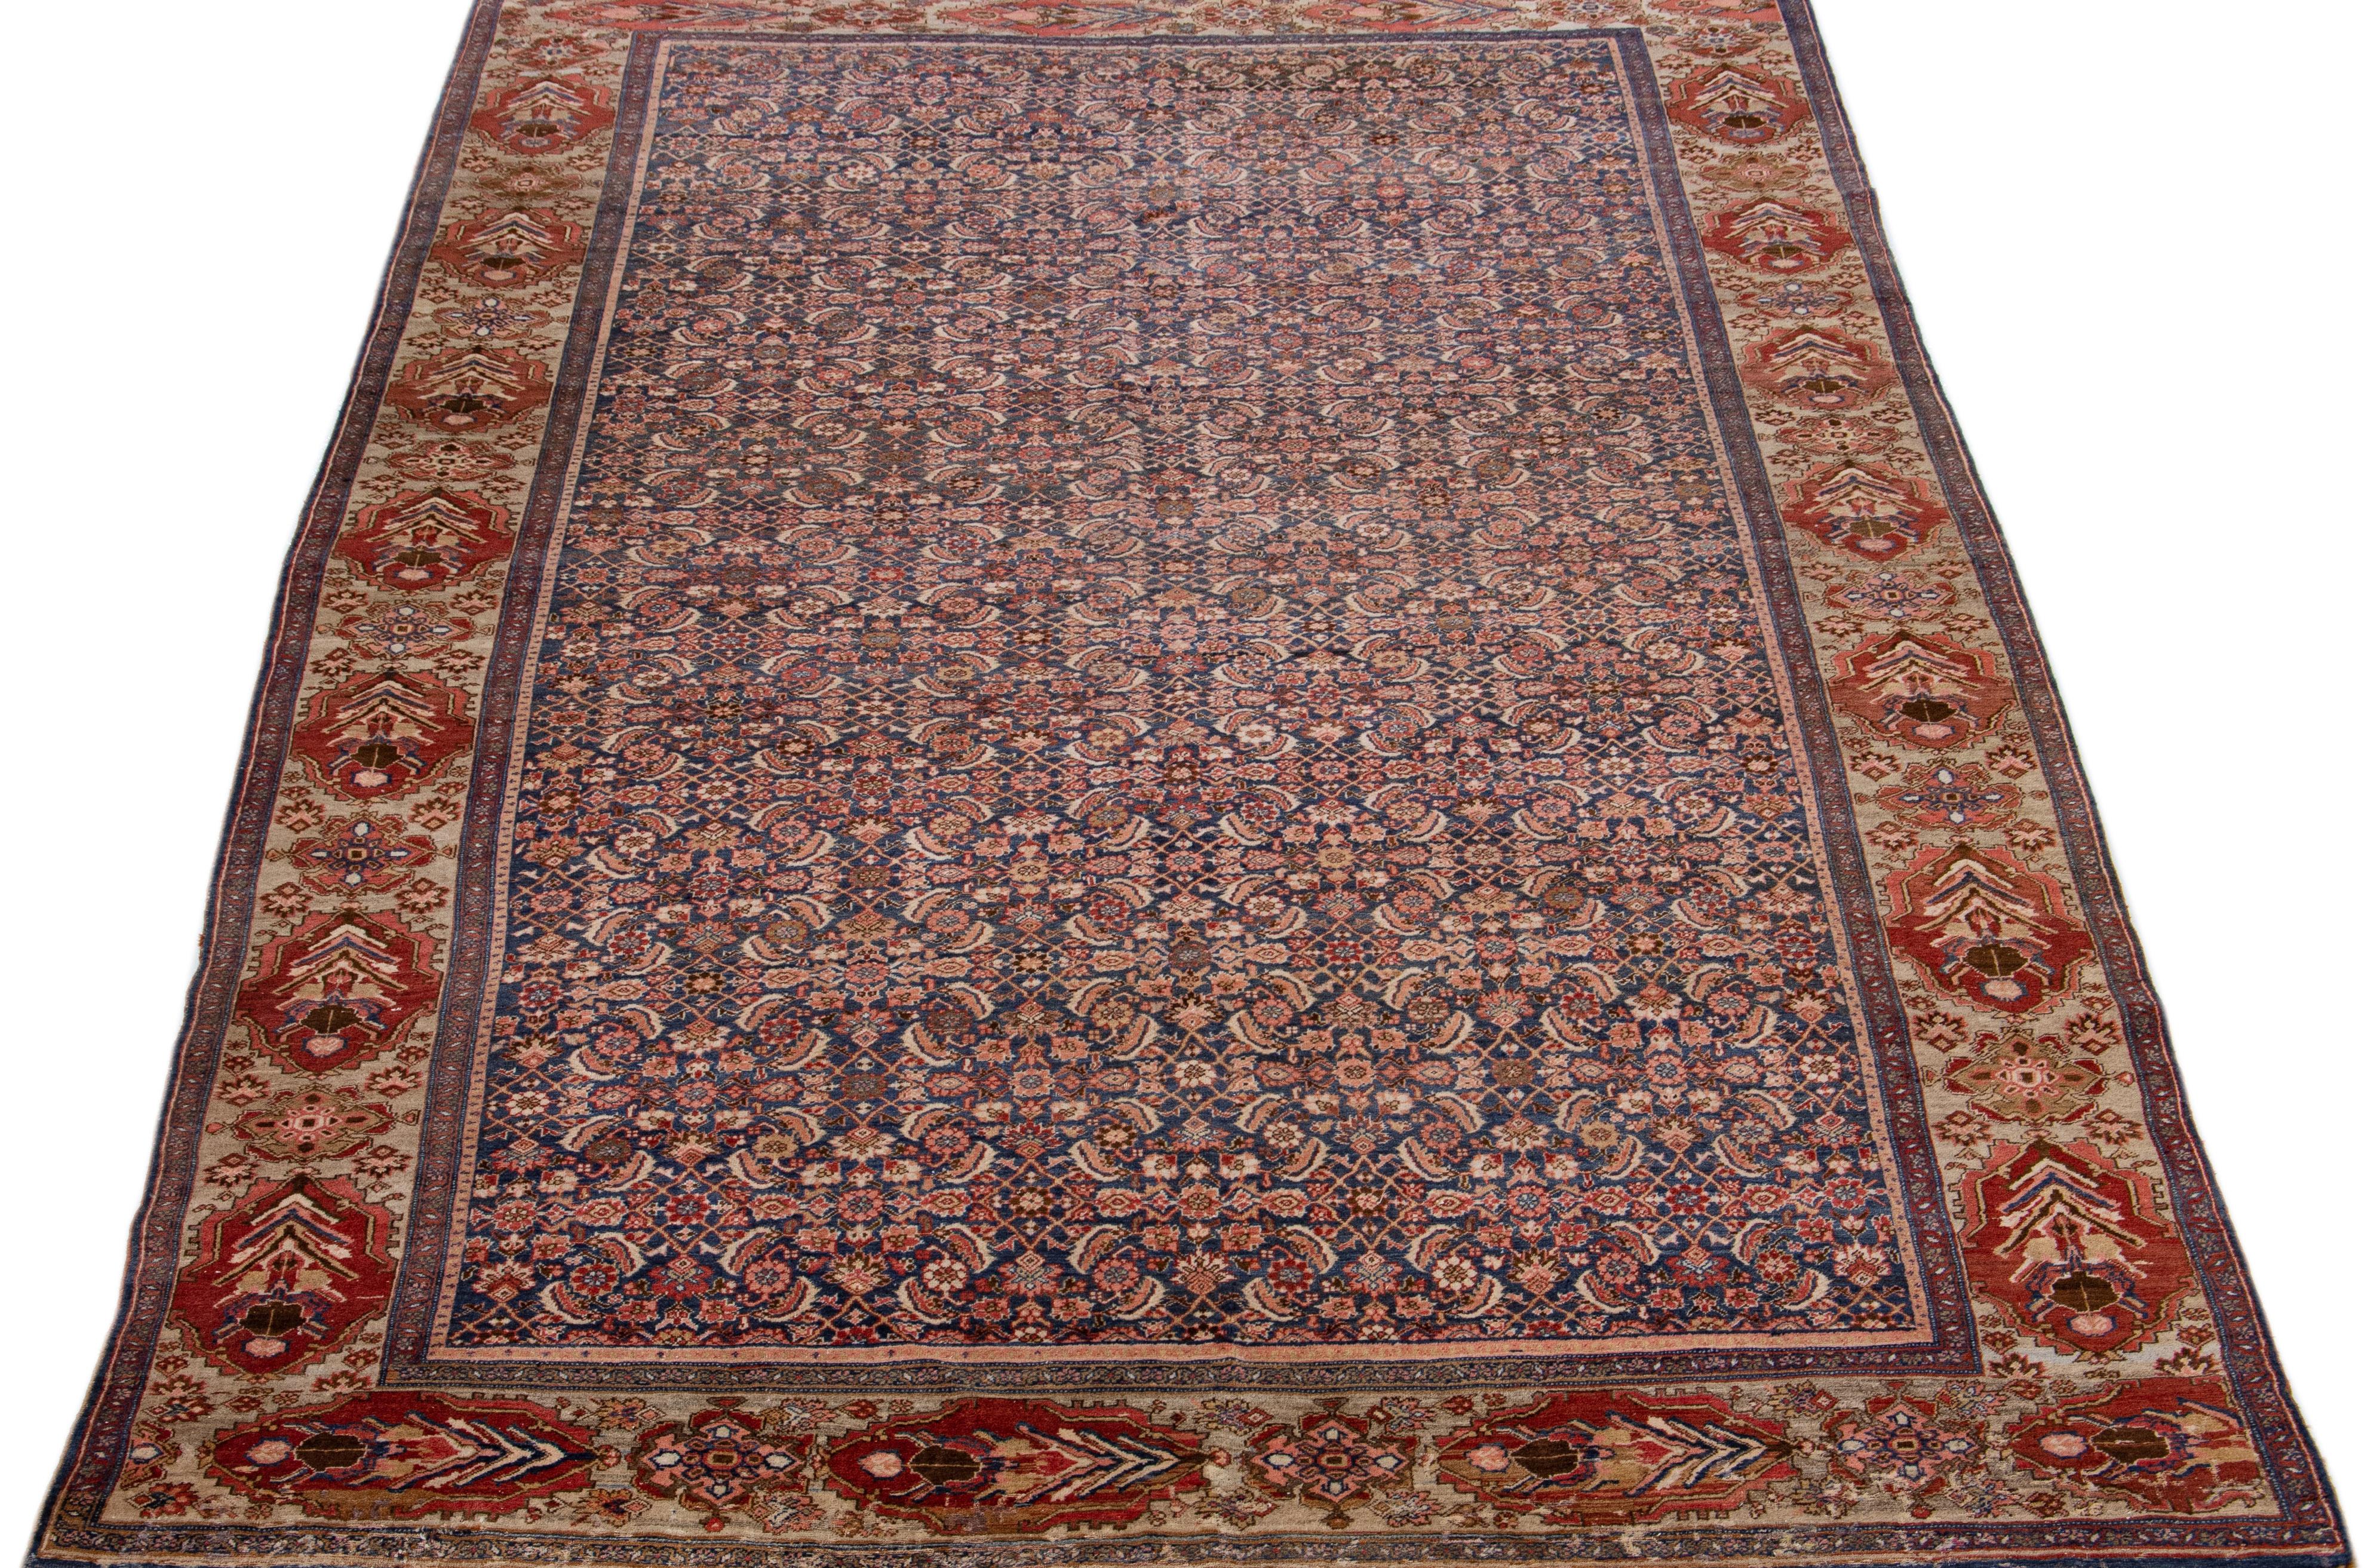 Beautiful antique Bidjar hand-knotted wool rug with a blue color field. This Persian rug has rust, green, and pink accents colors in a gorgeous traditional floral design.

This rug measures 9' x 13'8